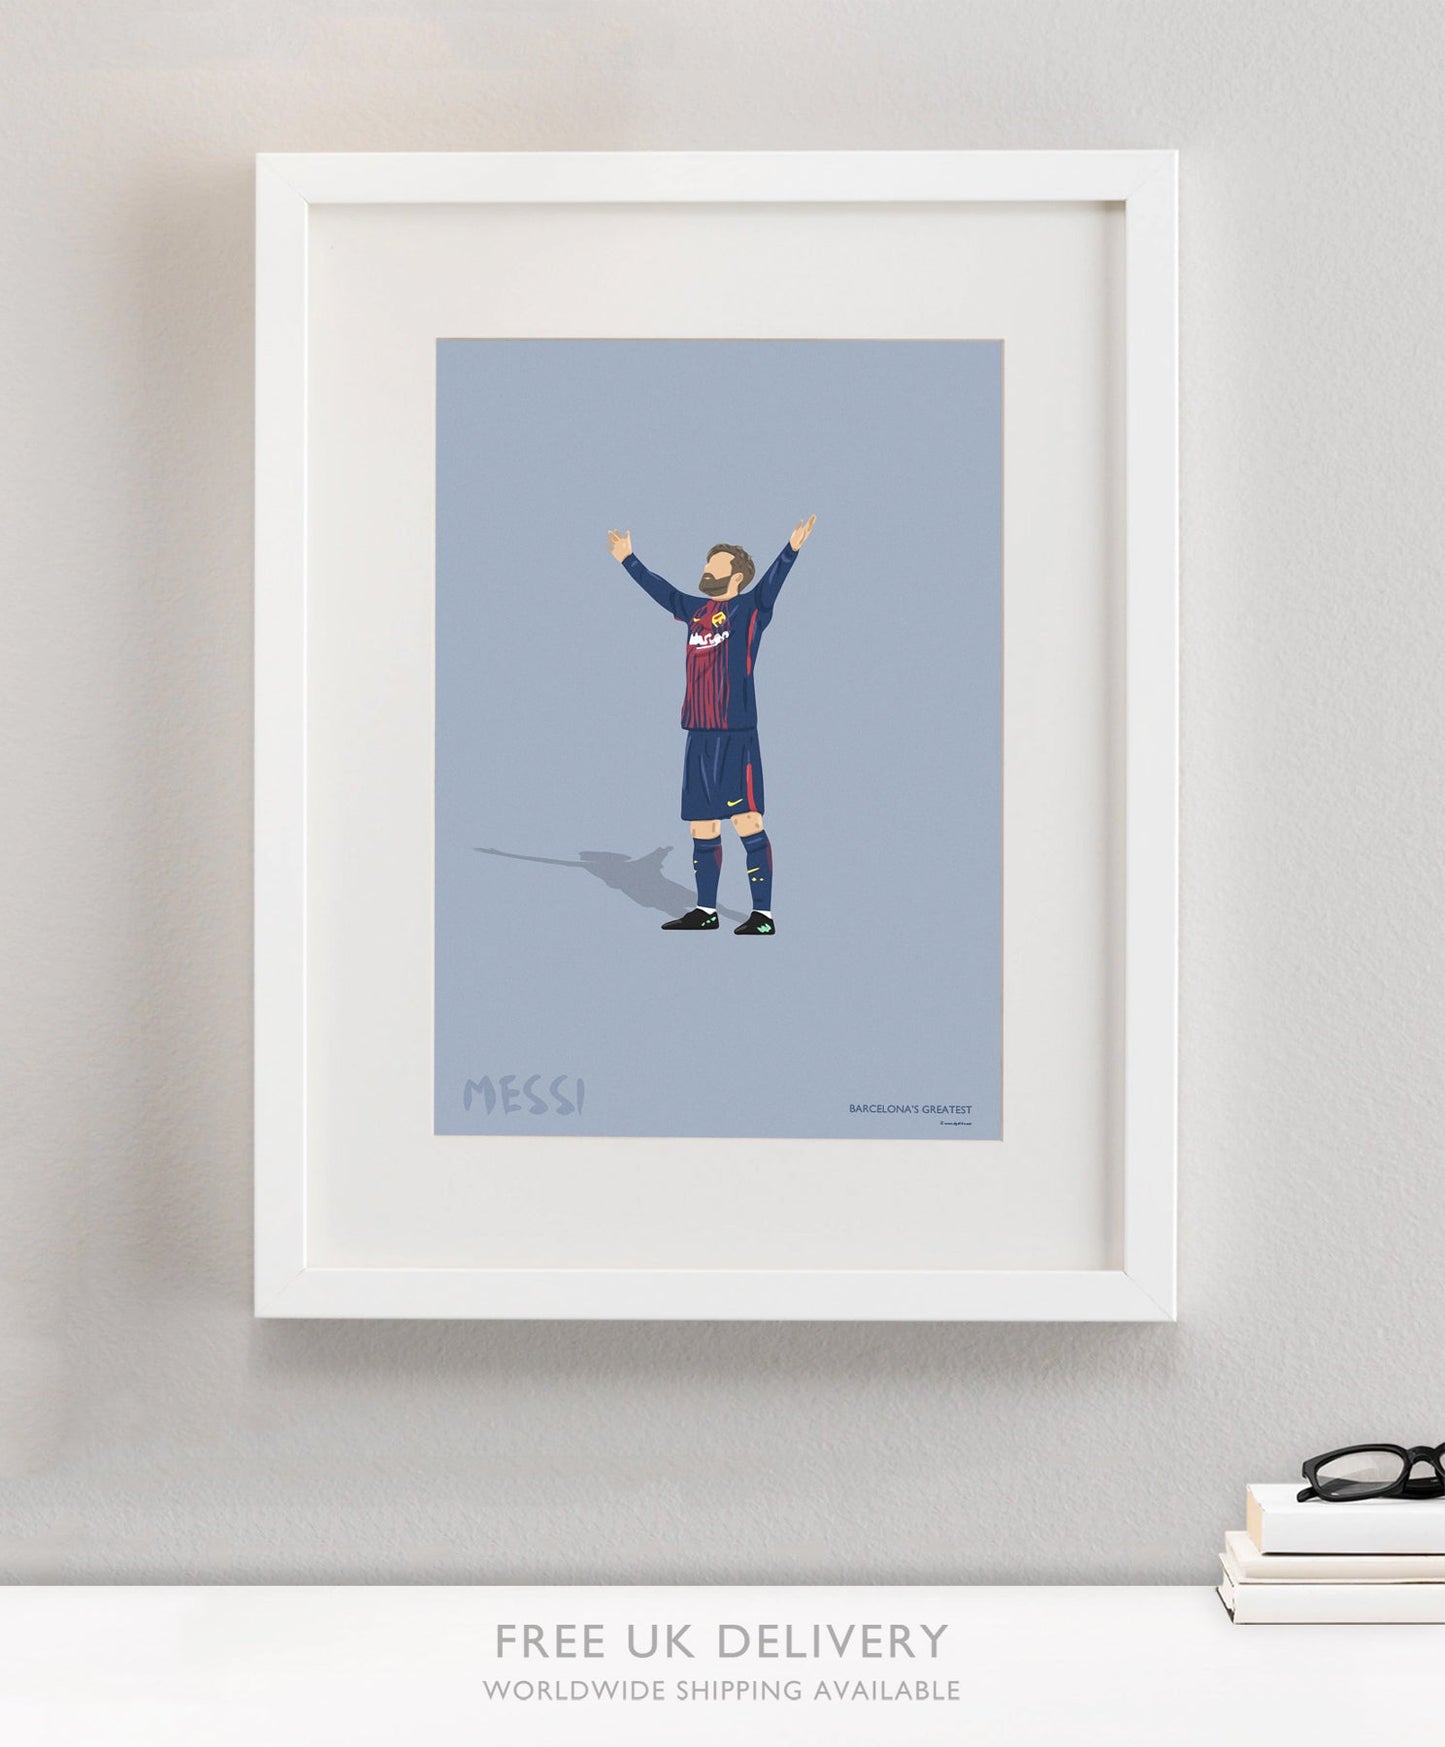 Lionel Messi Art - North Section